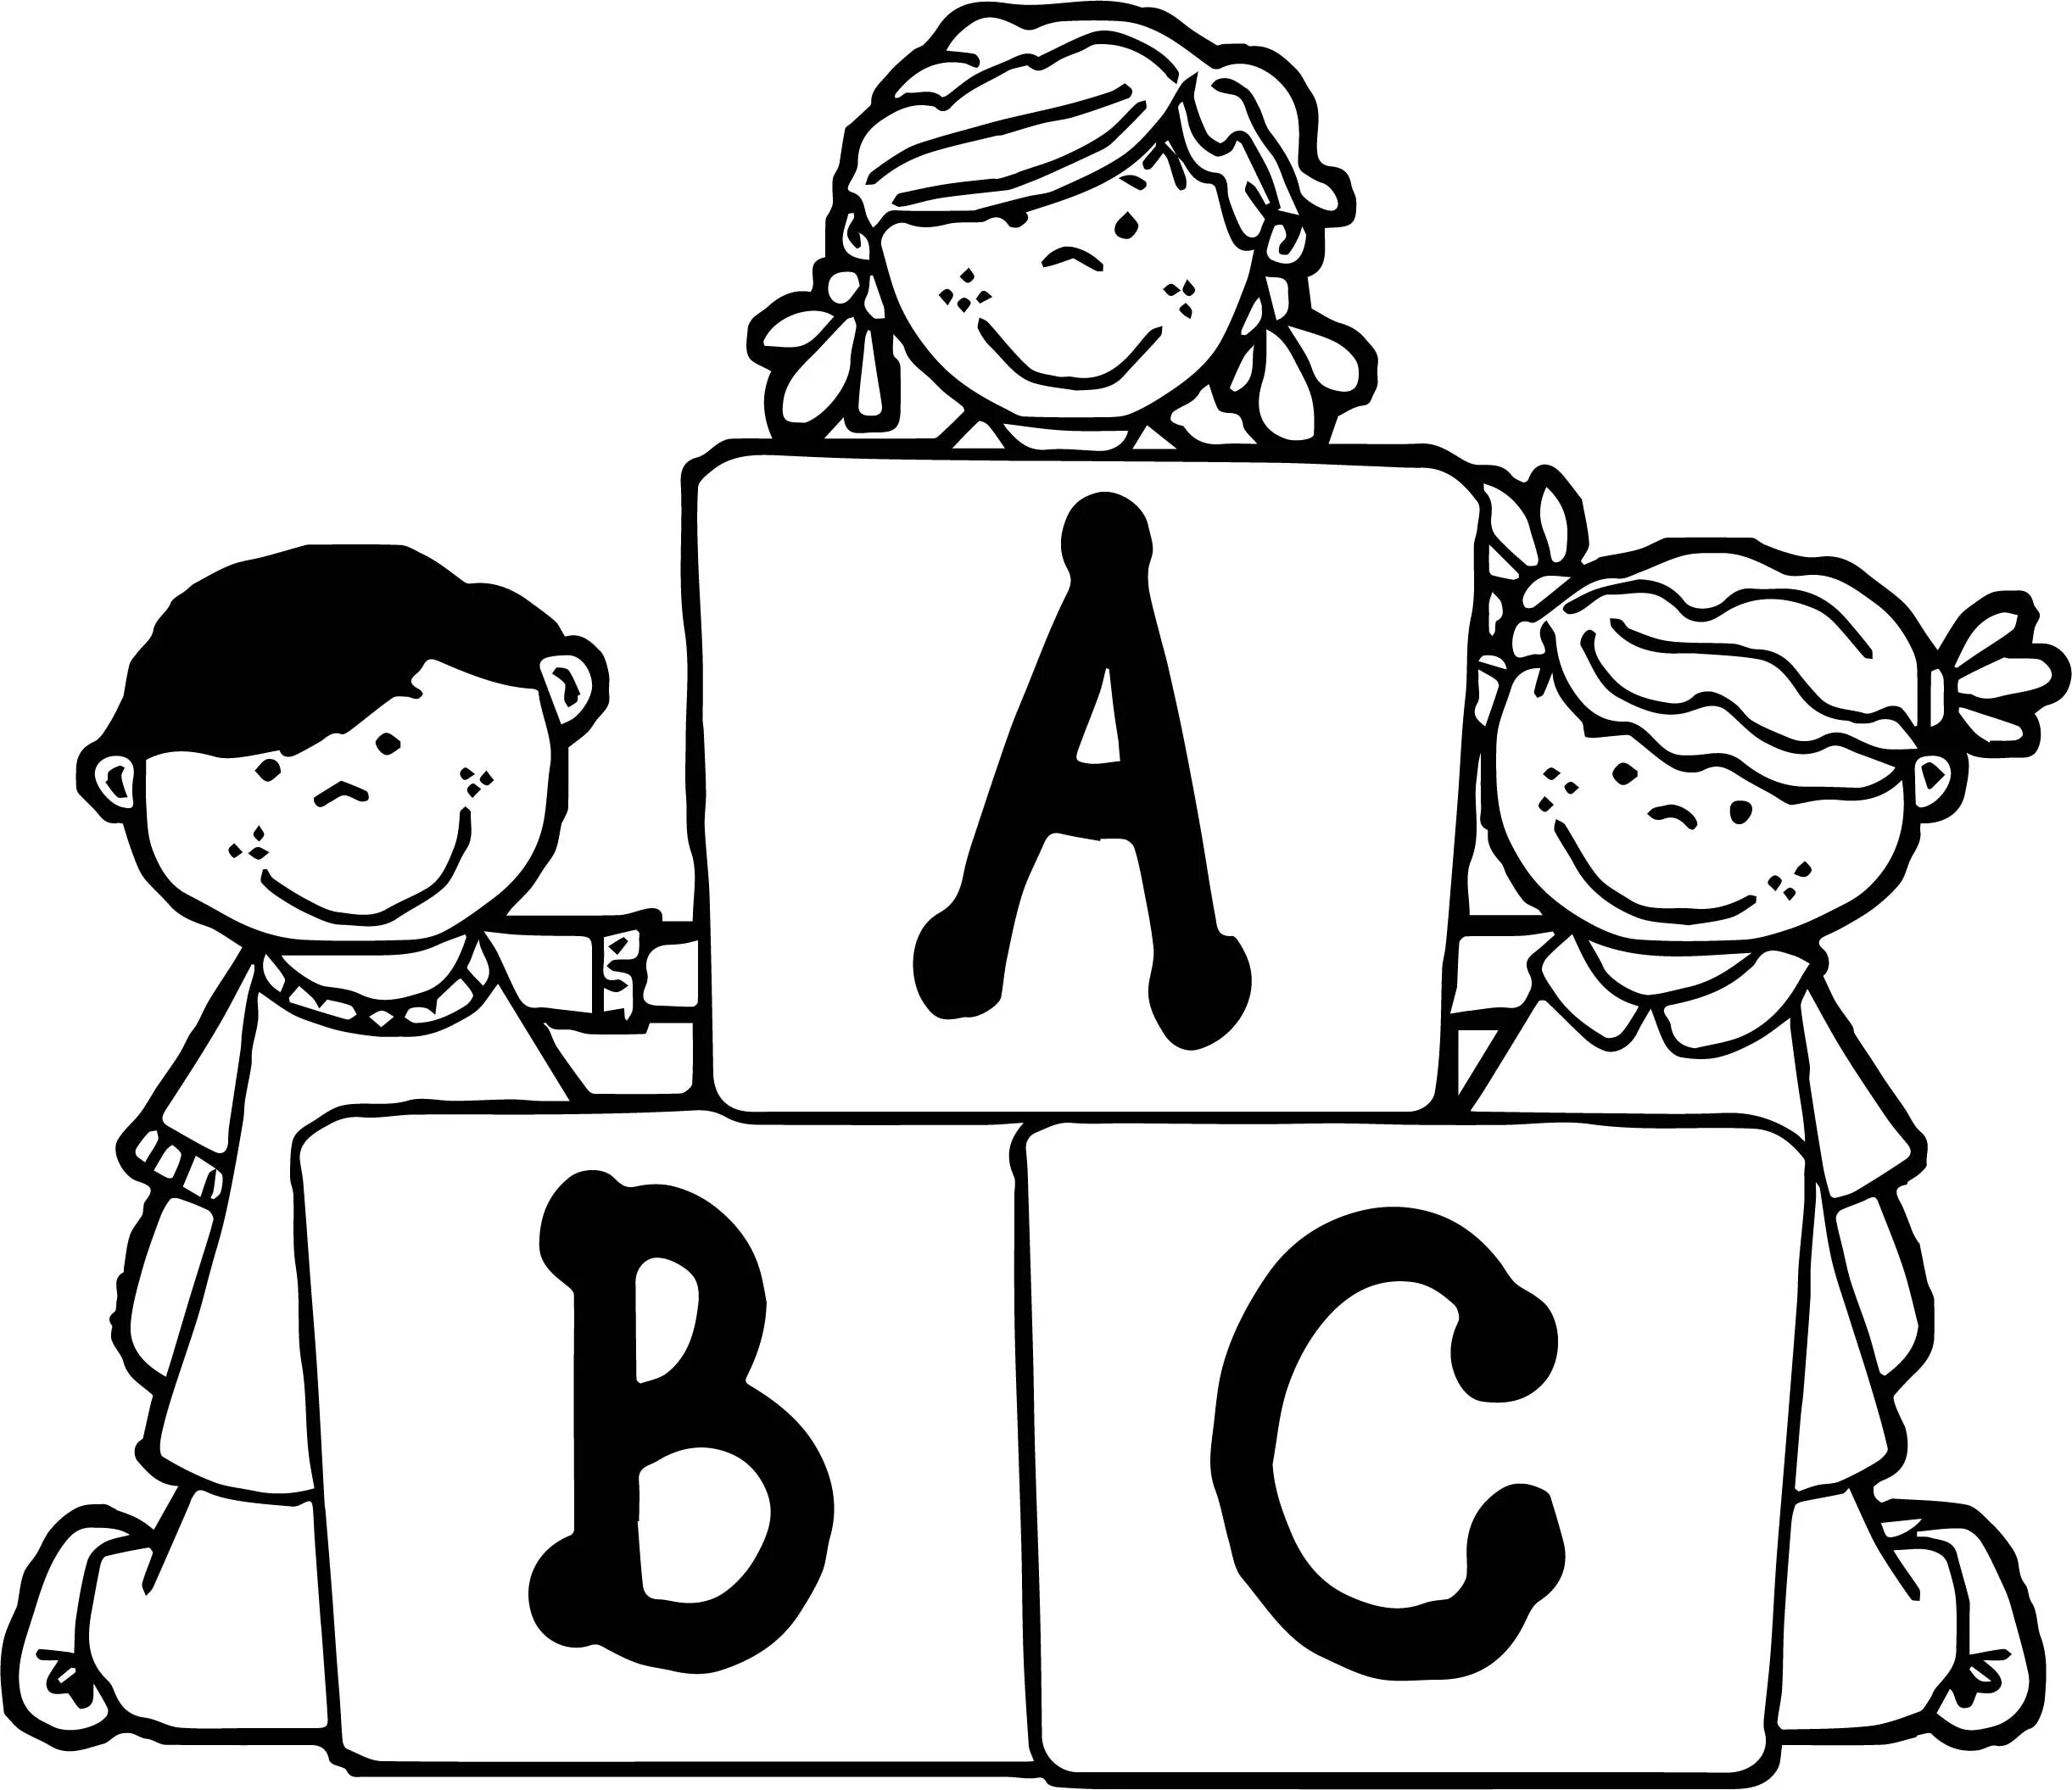 Abc for kids #17